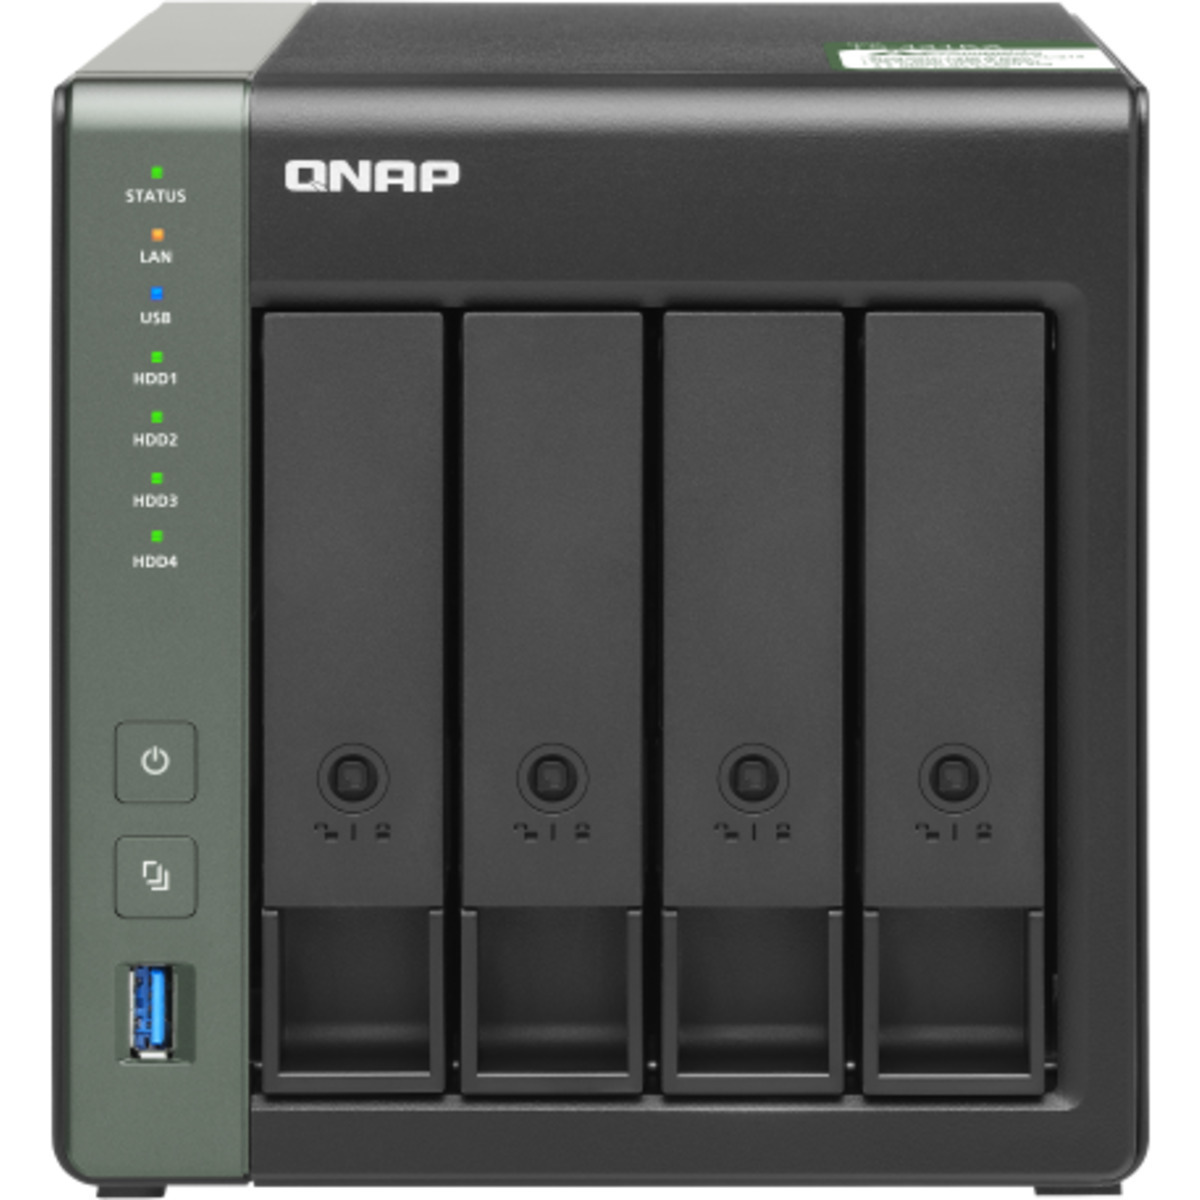 QNAP TS-431KX NAS - Network Attached Storage Device Burn-In Tested Configurations - ON SALE - FREE RAM UPGRADE